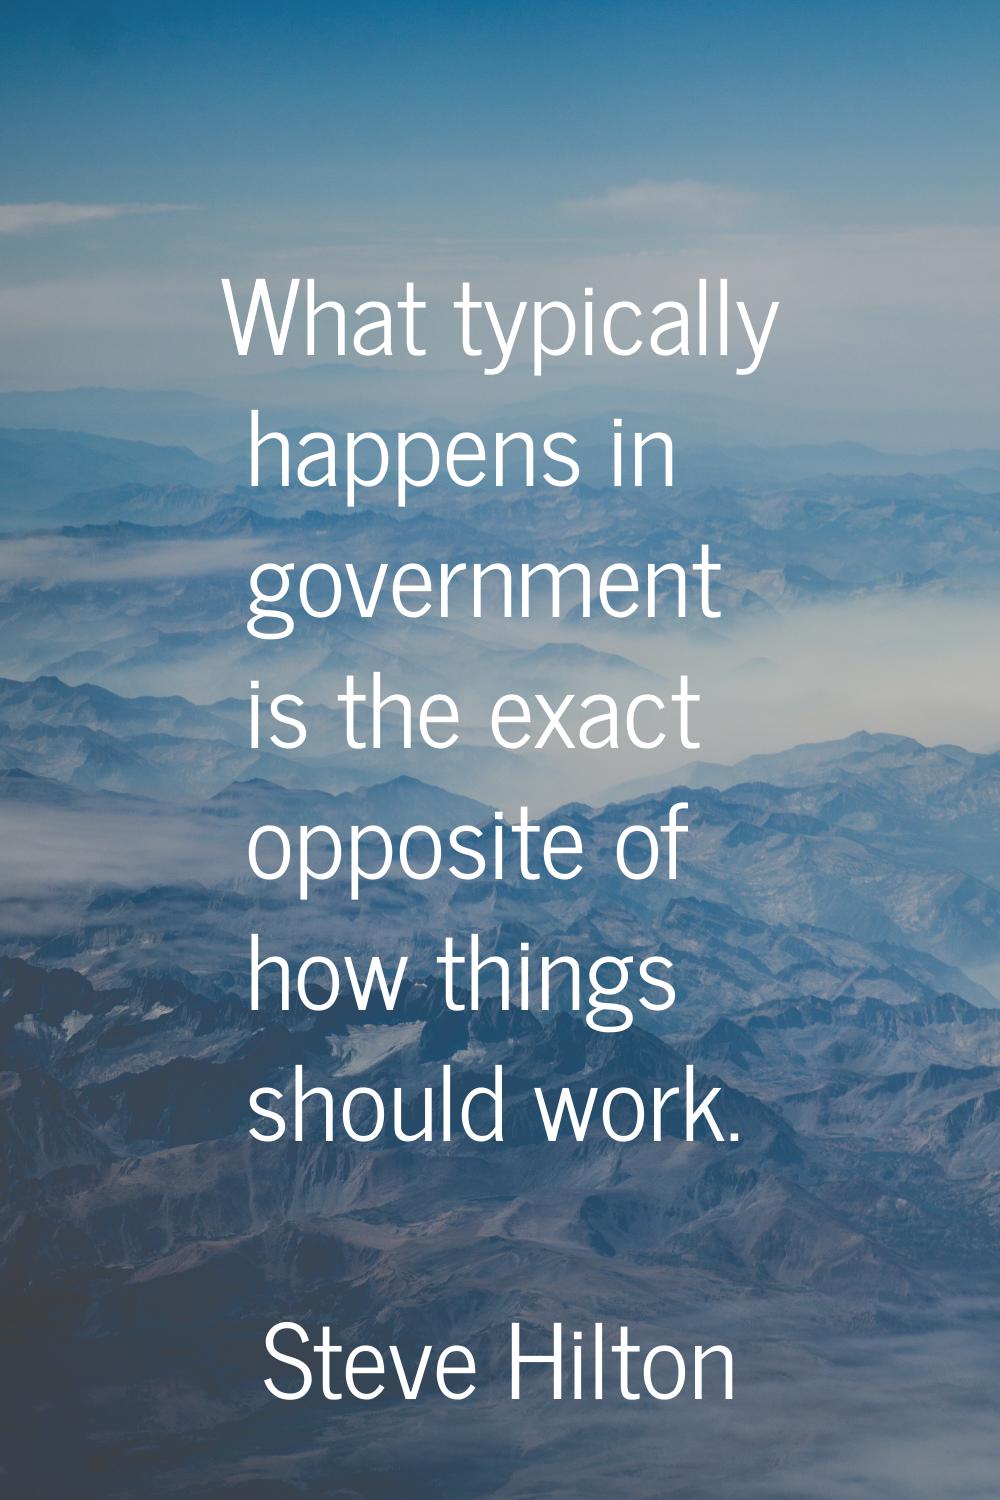 What typically happens in government is the exact opposite of how things should work.